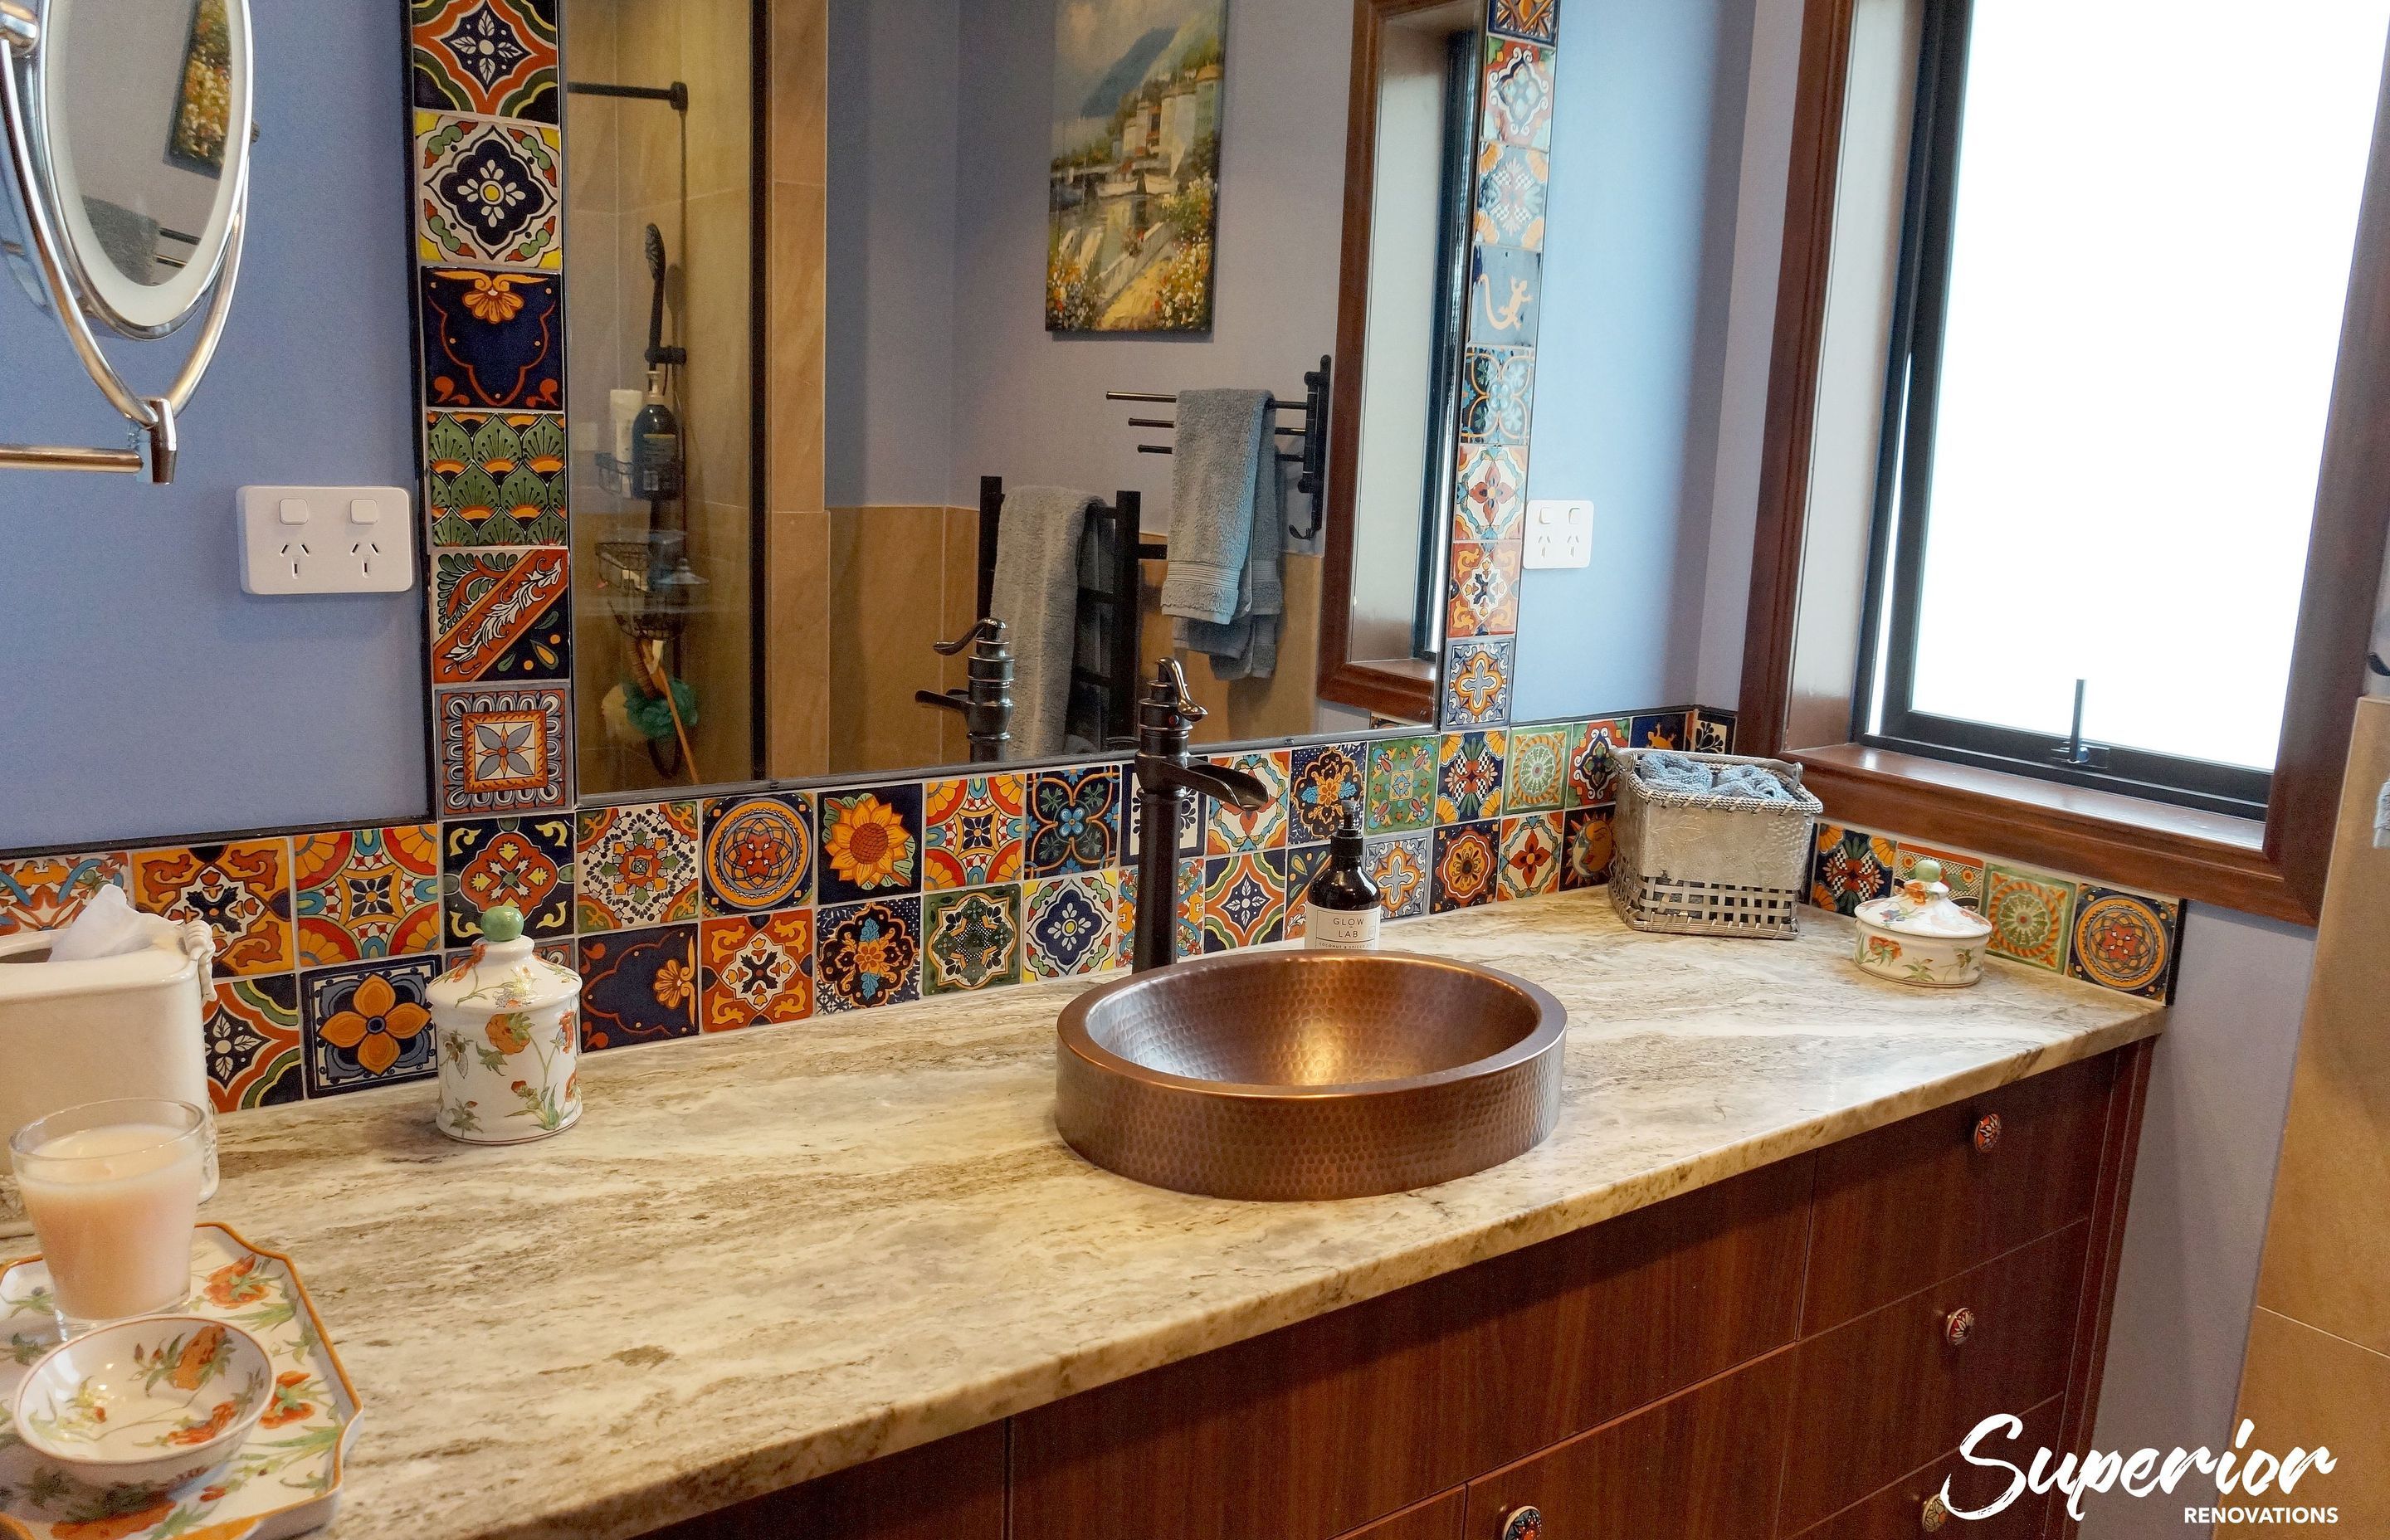 Mary Stuart’s Spanish style bathroom in Stanmore Bay features blue painted walls and colourful mosaic tiles to add a ‘pop’ of colour to her bathroom